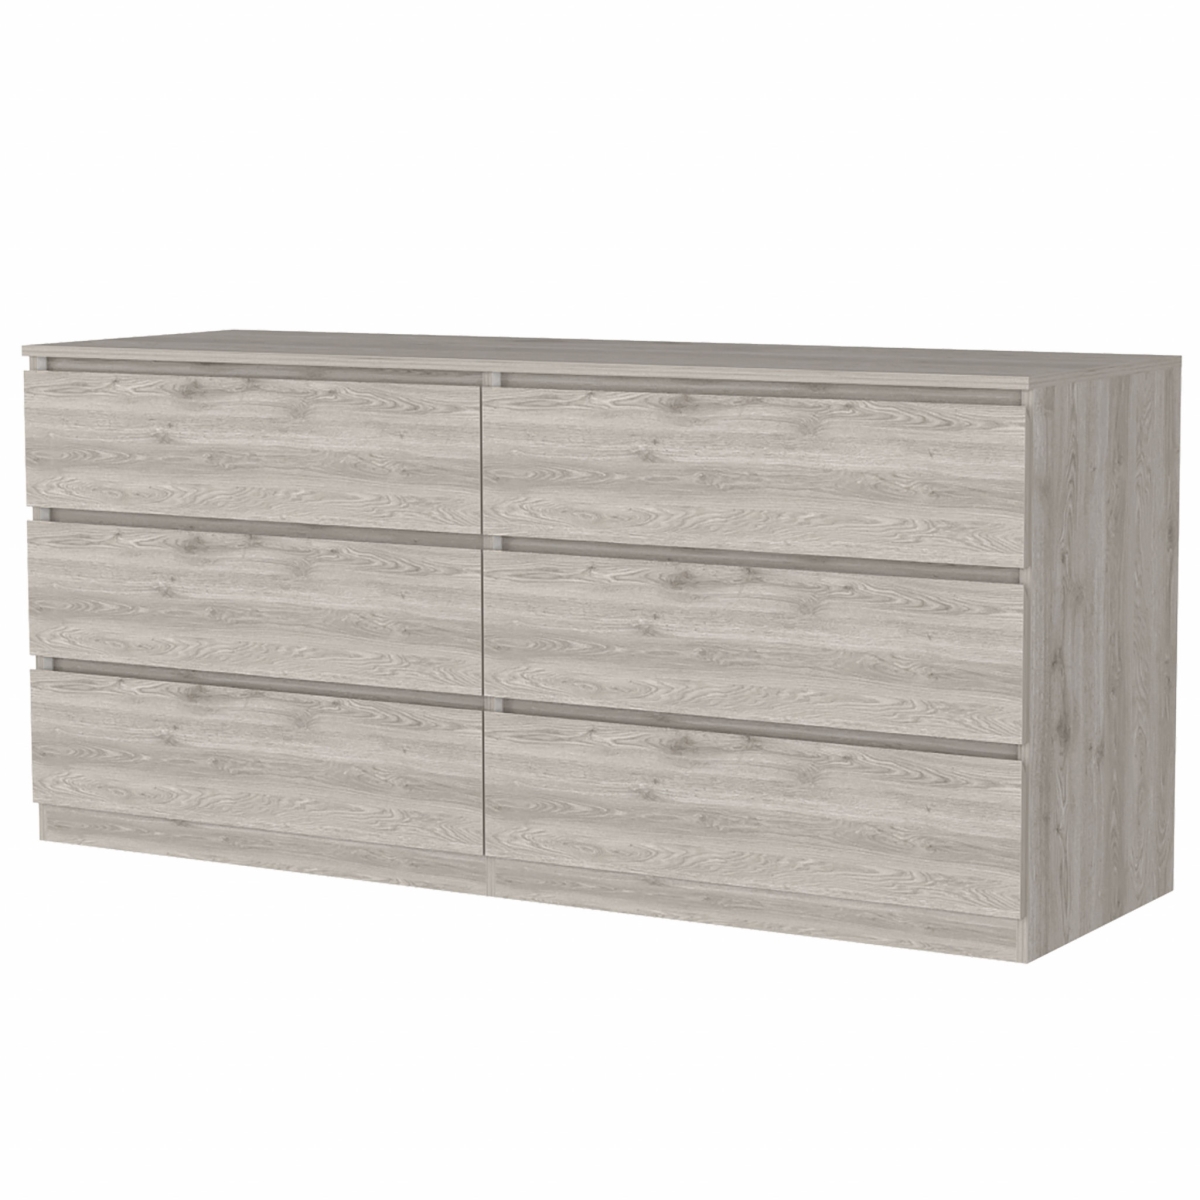 60 in. Manufactured Wood Four Drawer Double Dresser, Light Grey -  Gfancy Fixtures, GF3109432